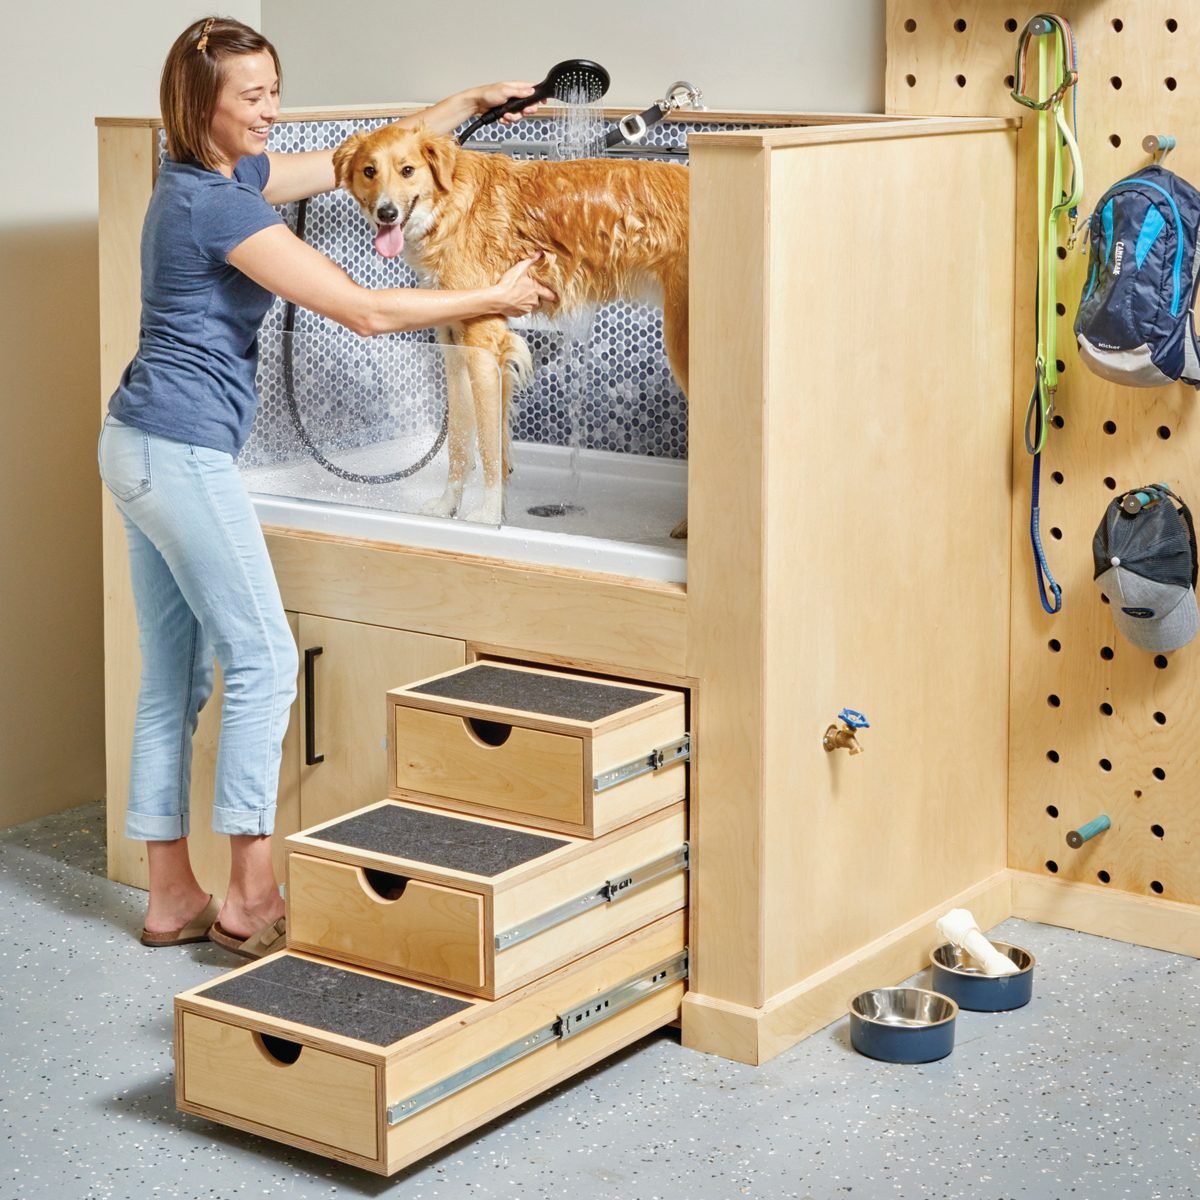 How to Build a Dog Washing Station